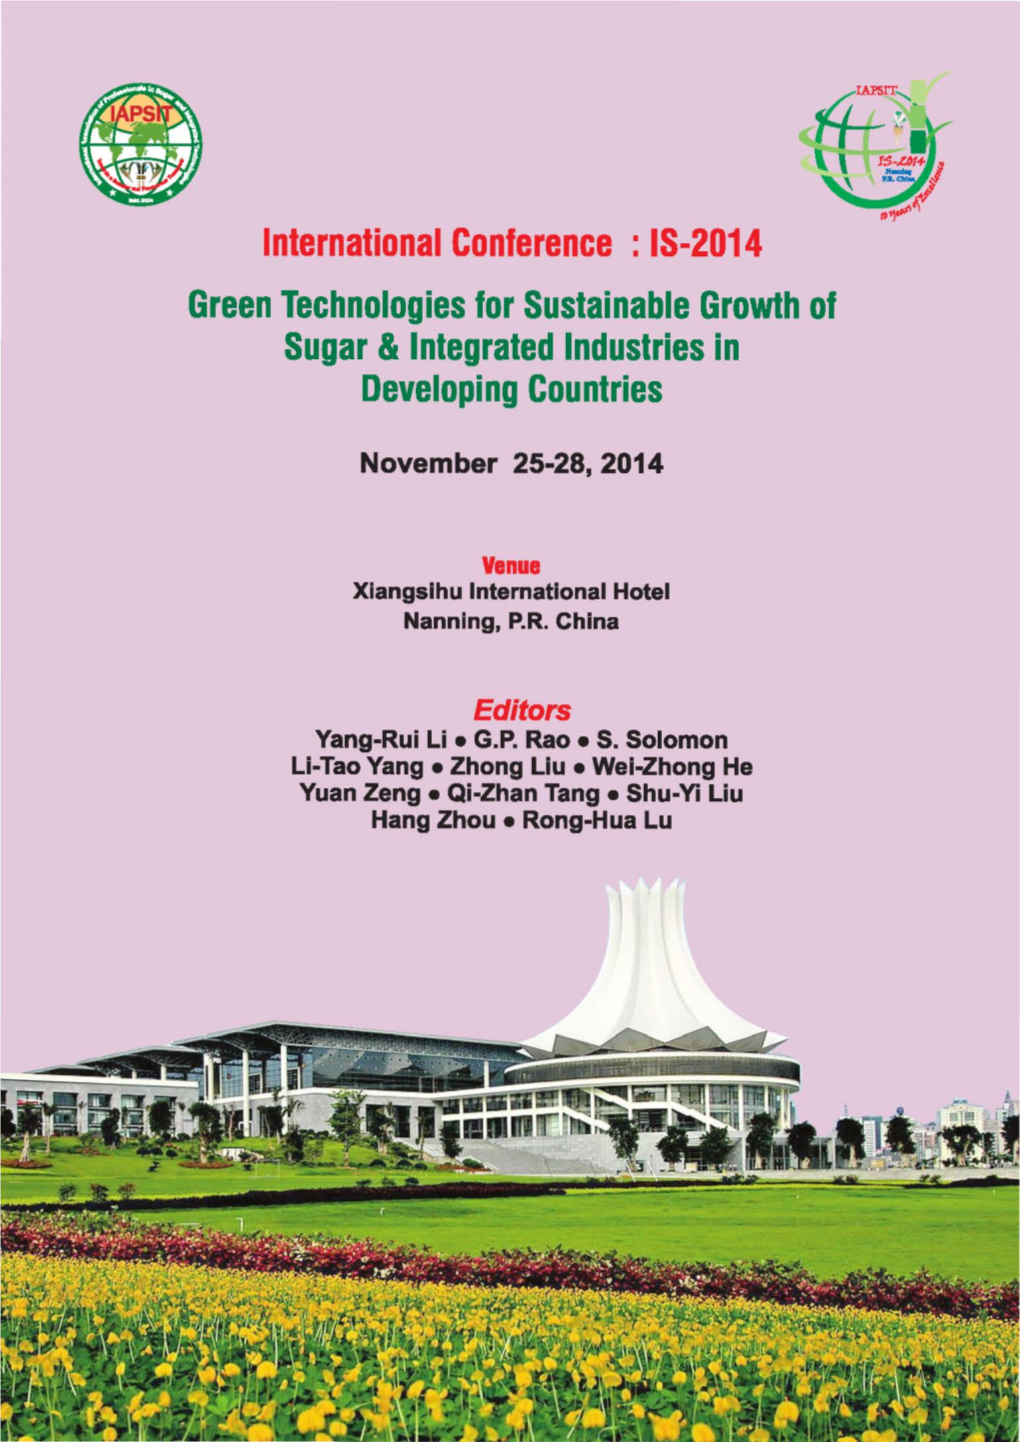 IS-2014 Green Technologies for Sustainable Growth of Sugar & Integrated Industries in Developing Countries